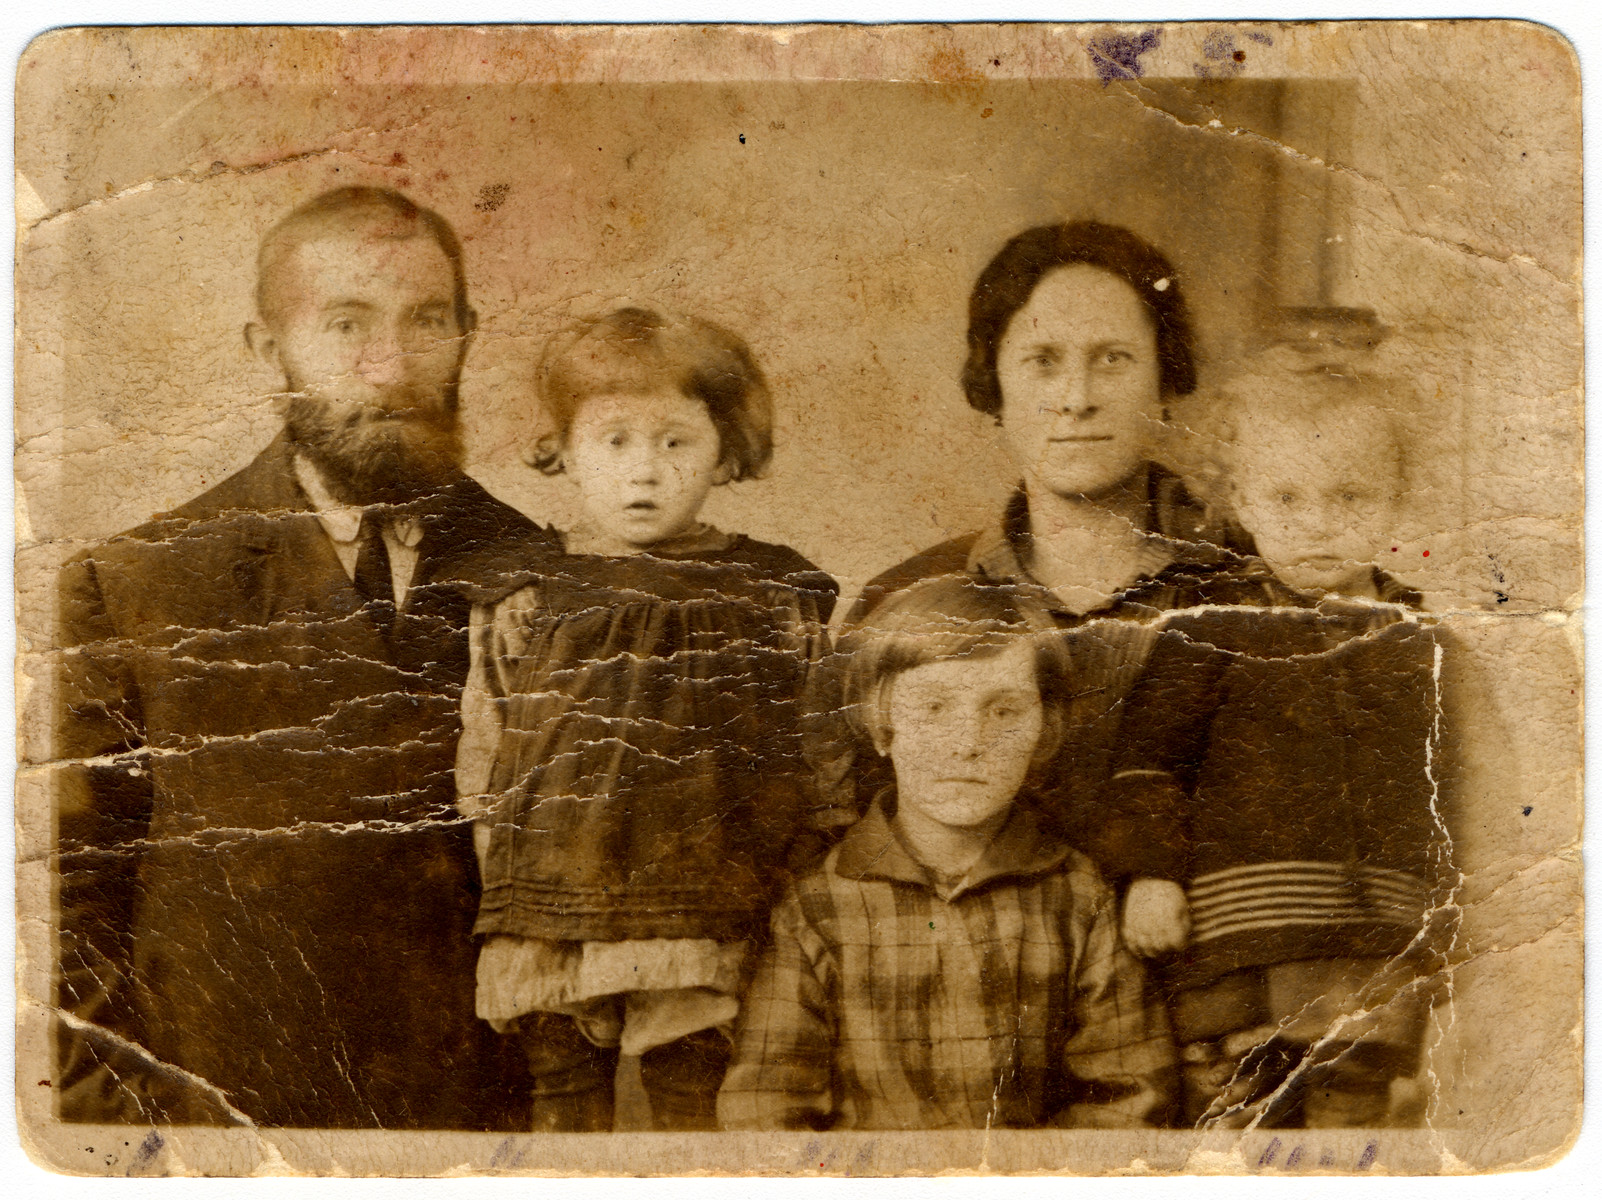 Prewar portrait of the Rechenman family in prewar Pulawy.

Pictured from left to right are Shmuel, Bayla Gitel, Yocheved, Ruchel and Elcia.